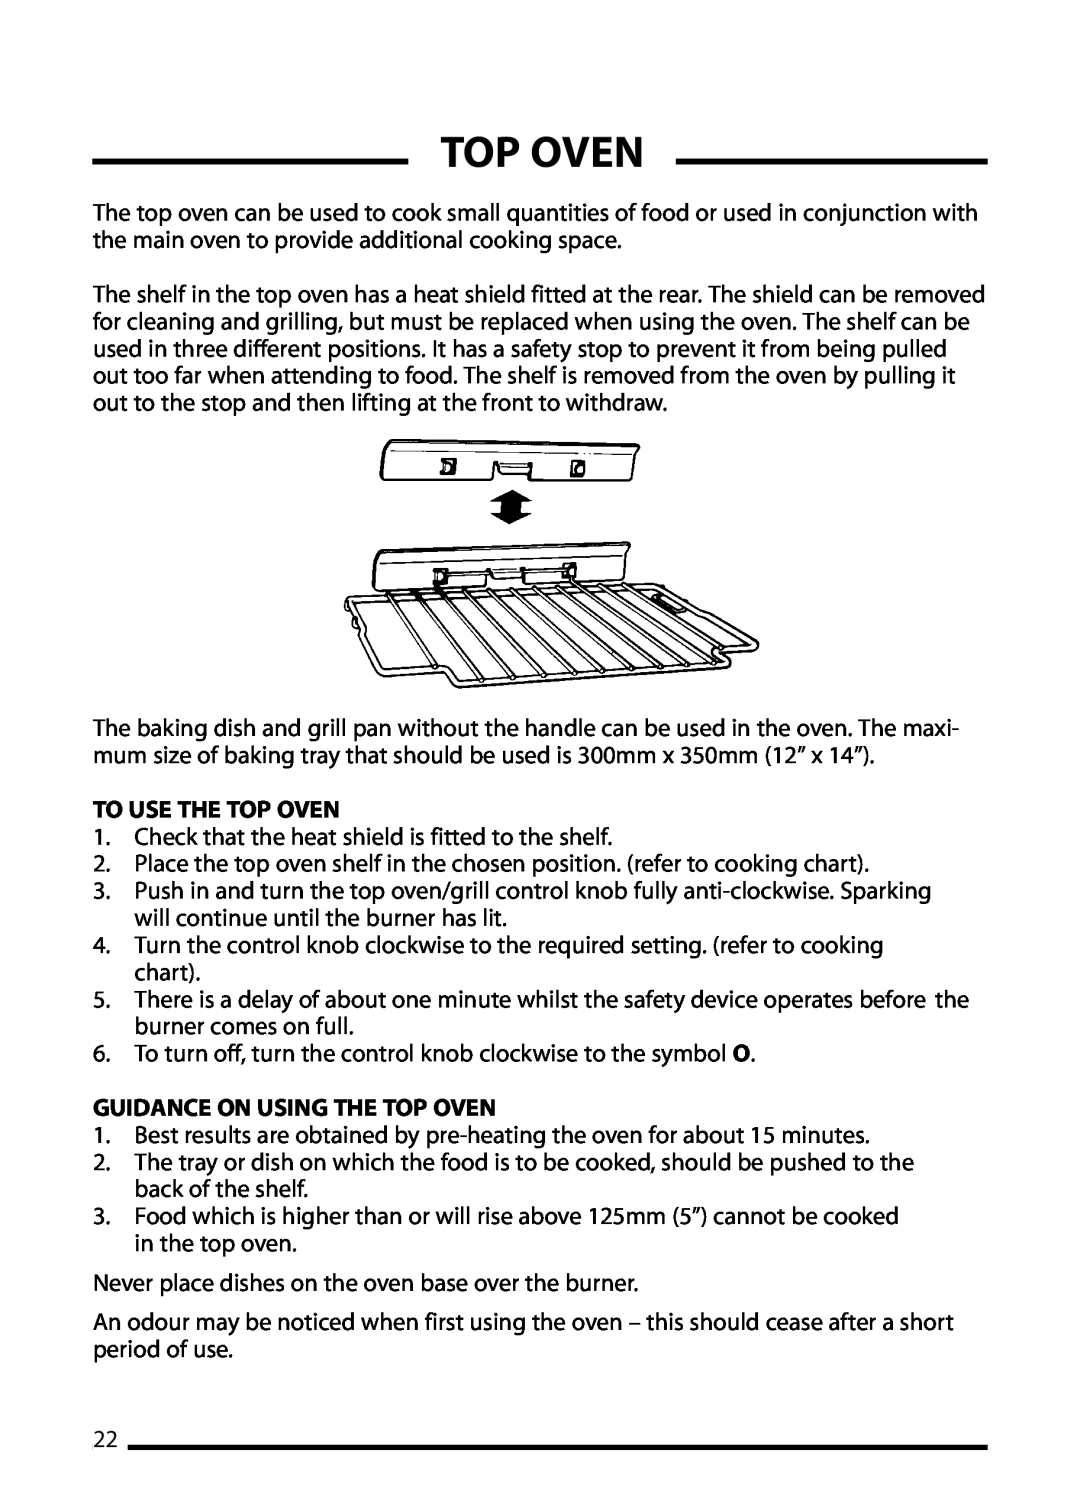 Cannon 10692G, 10698G, 10695G installation instructions To Use The Top Oven, Guidance On Using The Top Oven 